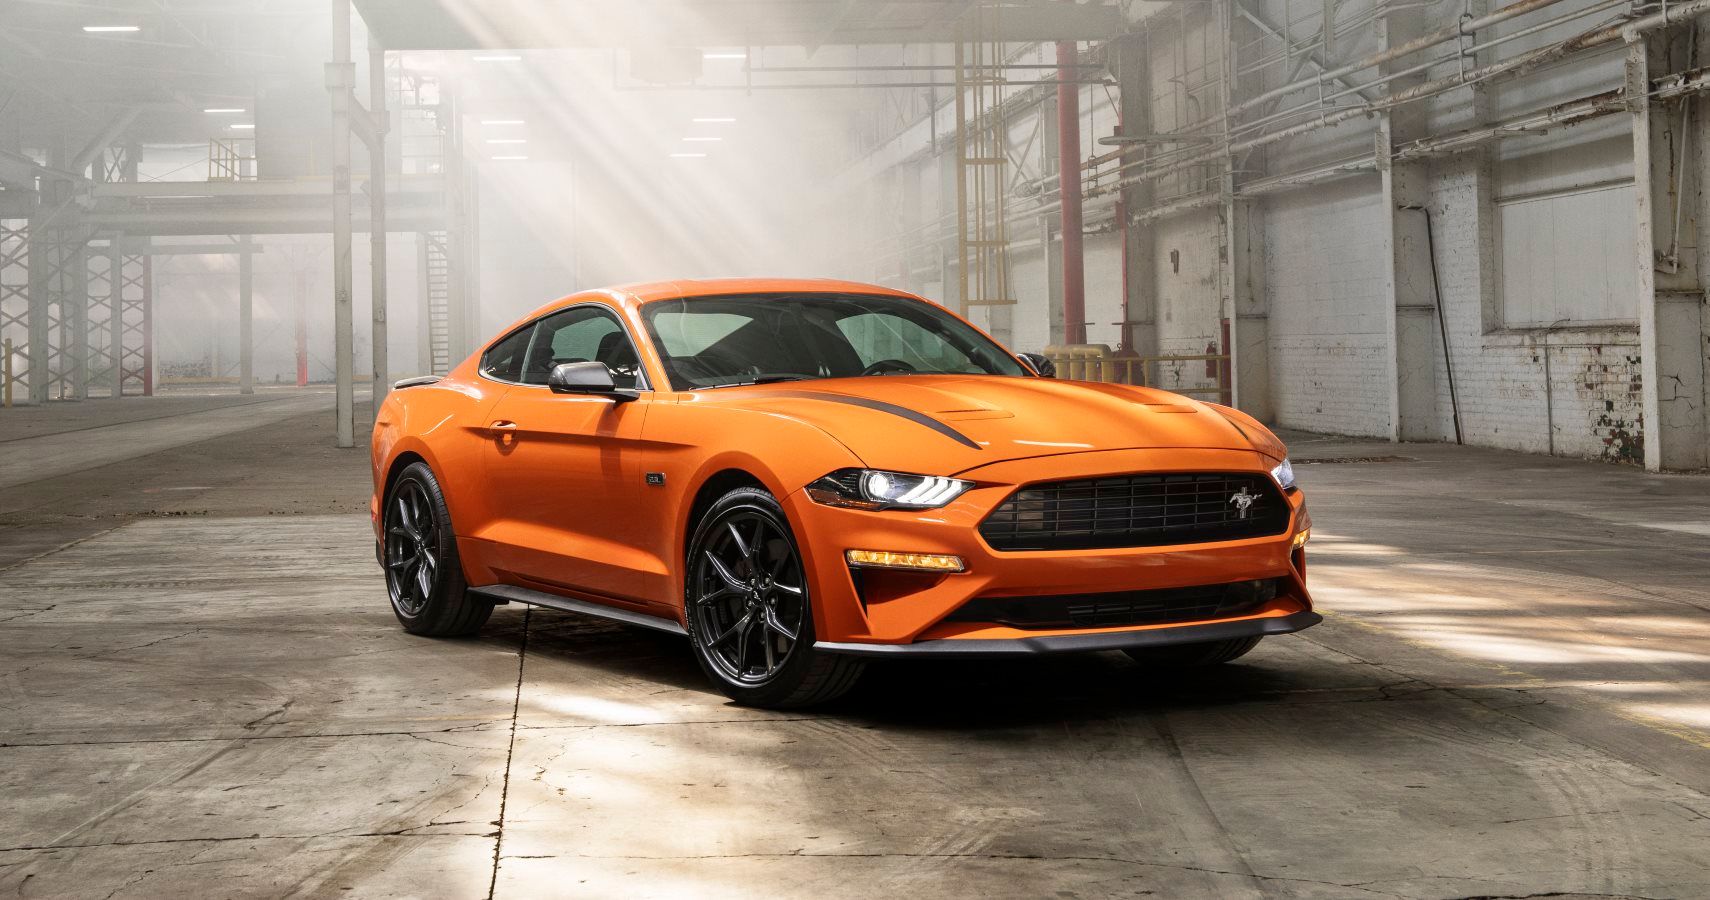 2019 Ford Mustang EcoBoost Orange Muscle Car